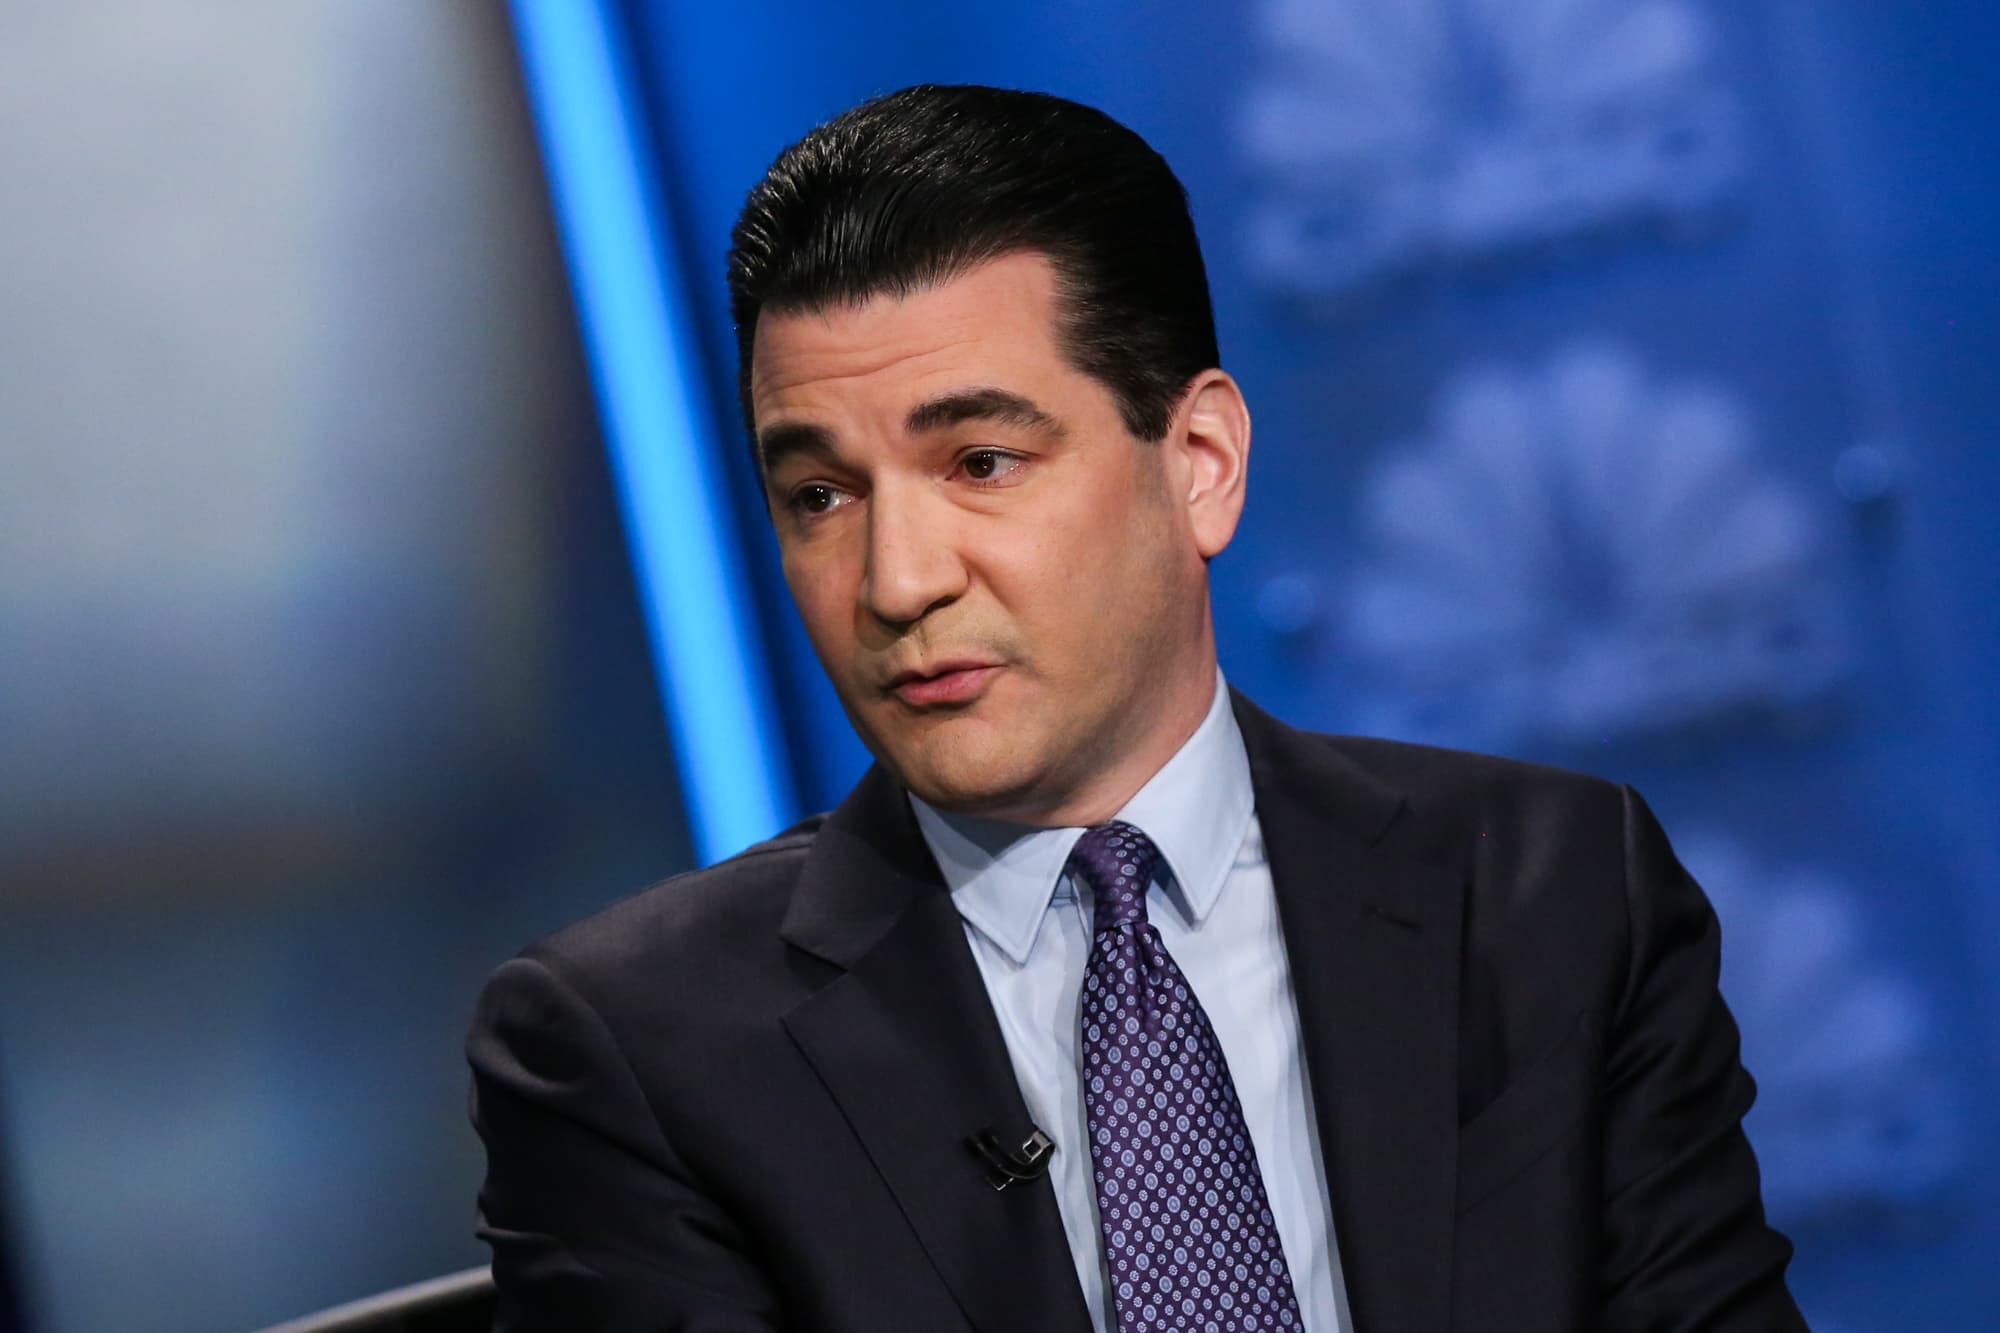 U.S. potentially facing ‘perpetual infection’ of Covid in spring as new variants spread, warns Dr. Scott Gottlieb